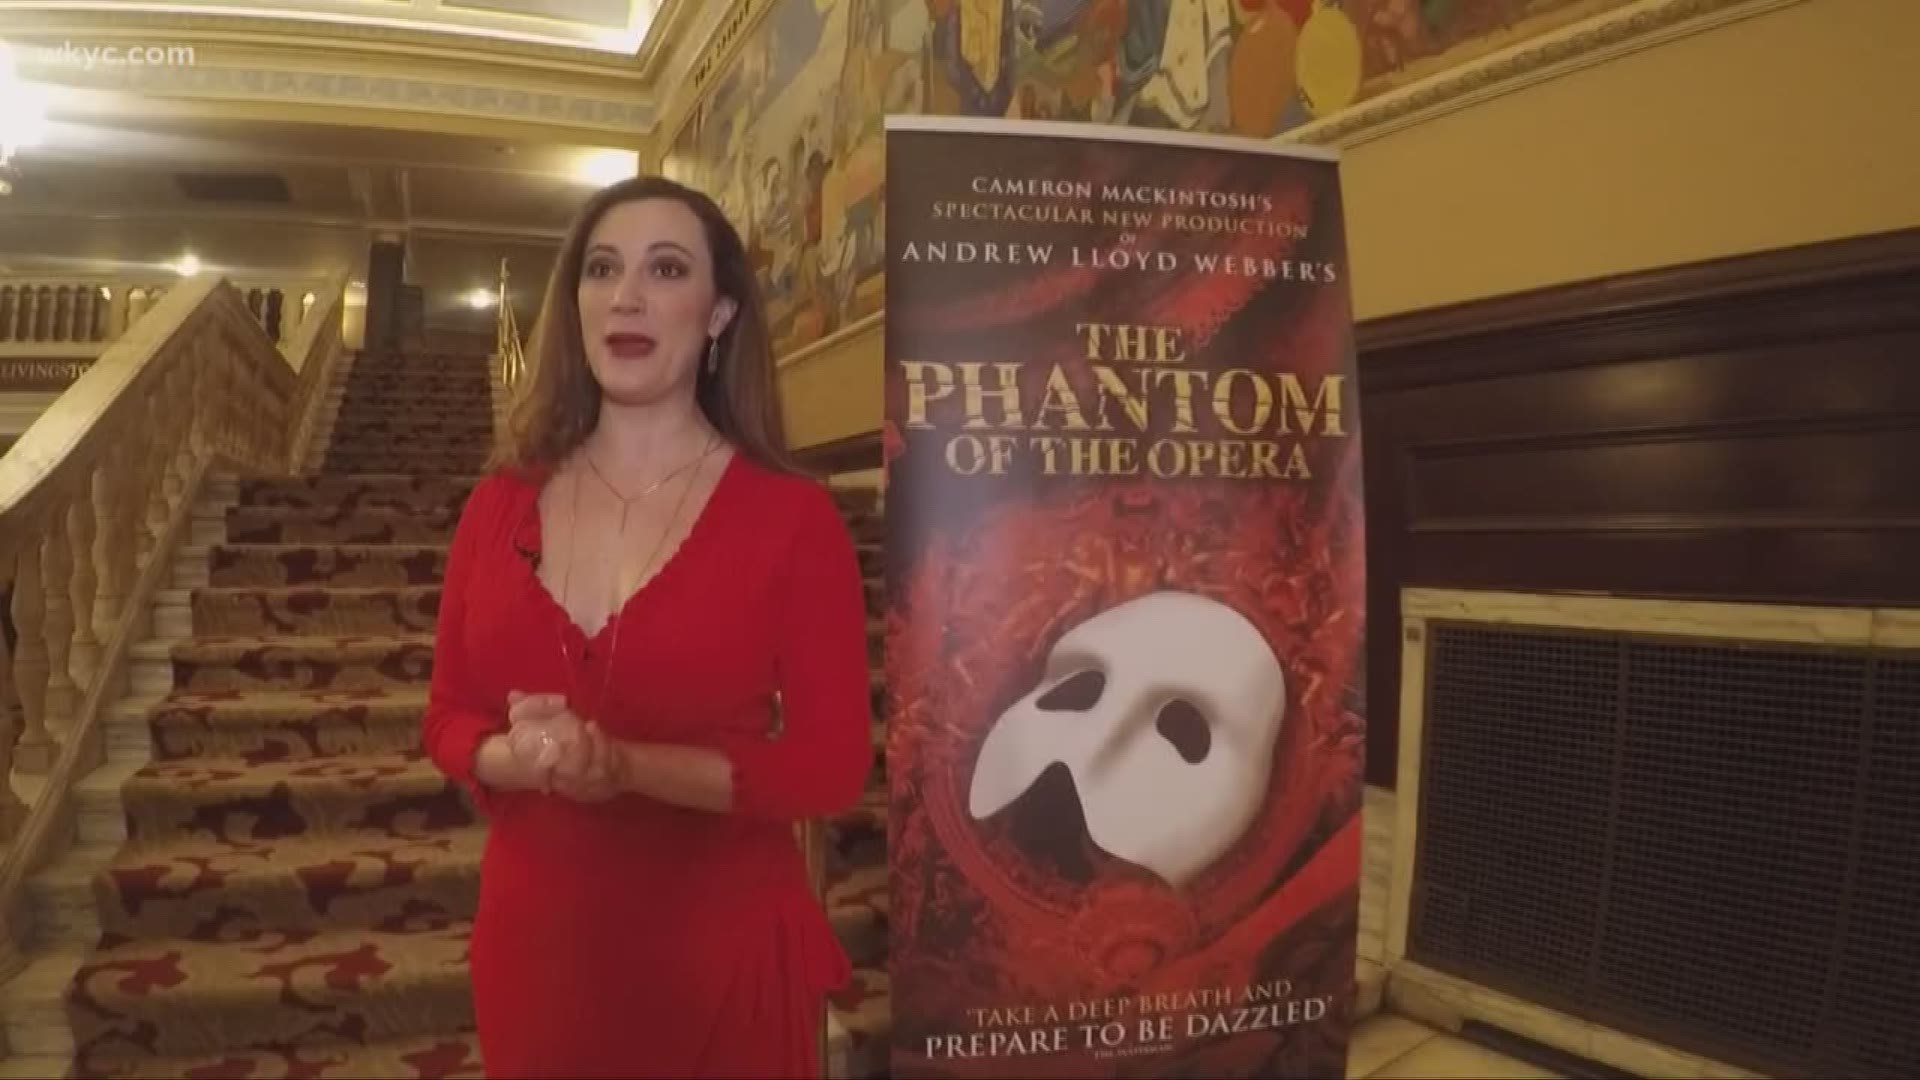 The Phantom of the Opera returns to Cleveland with Baldwin Wallace graduate in cast